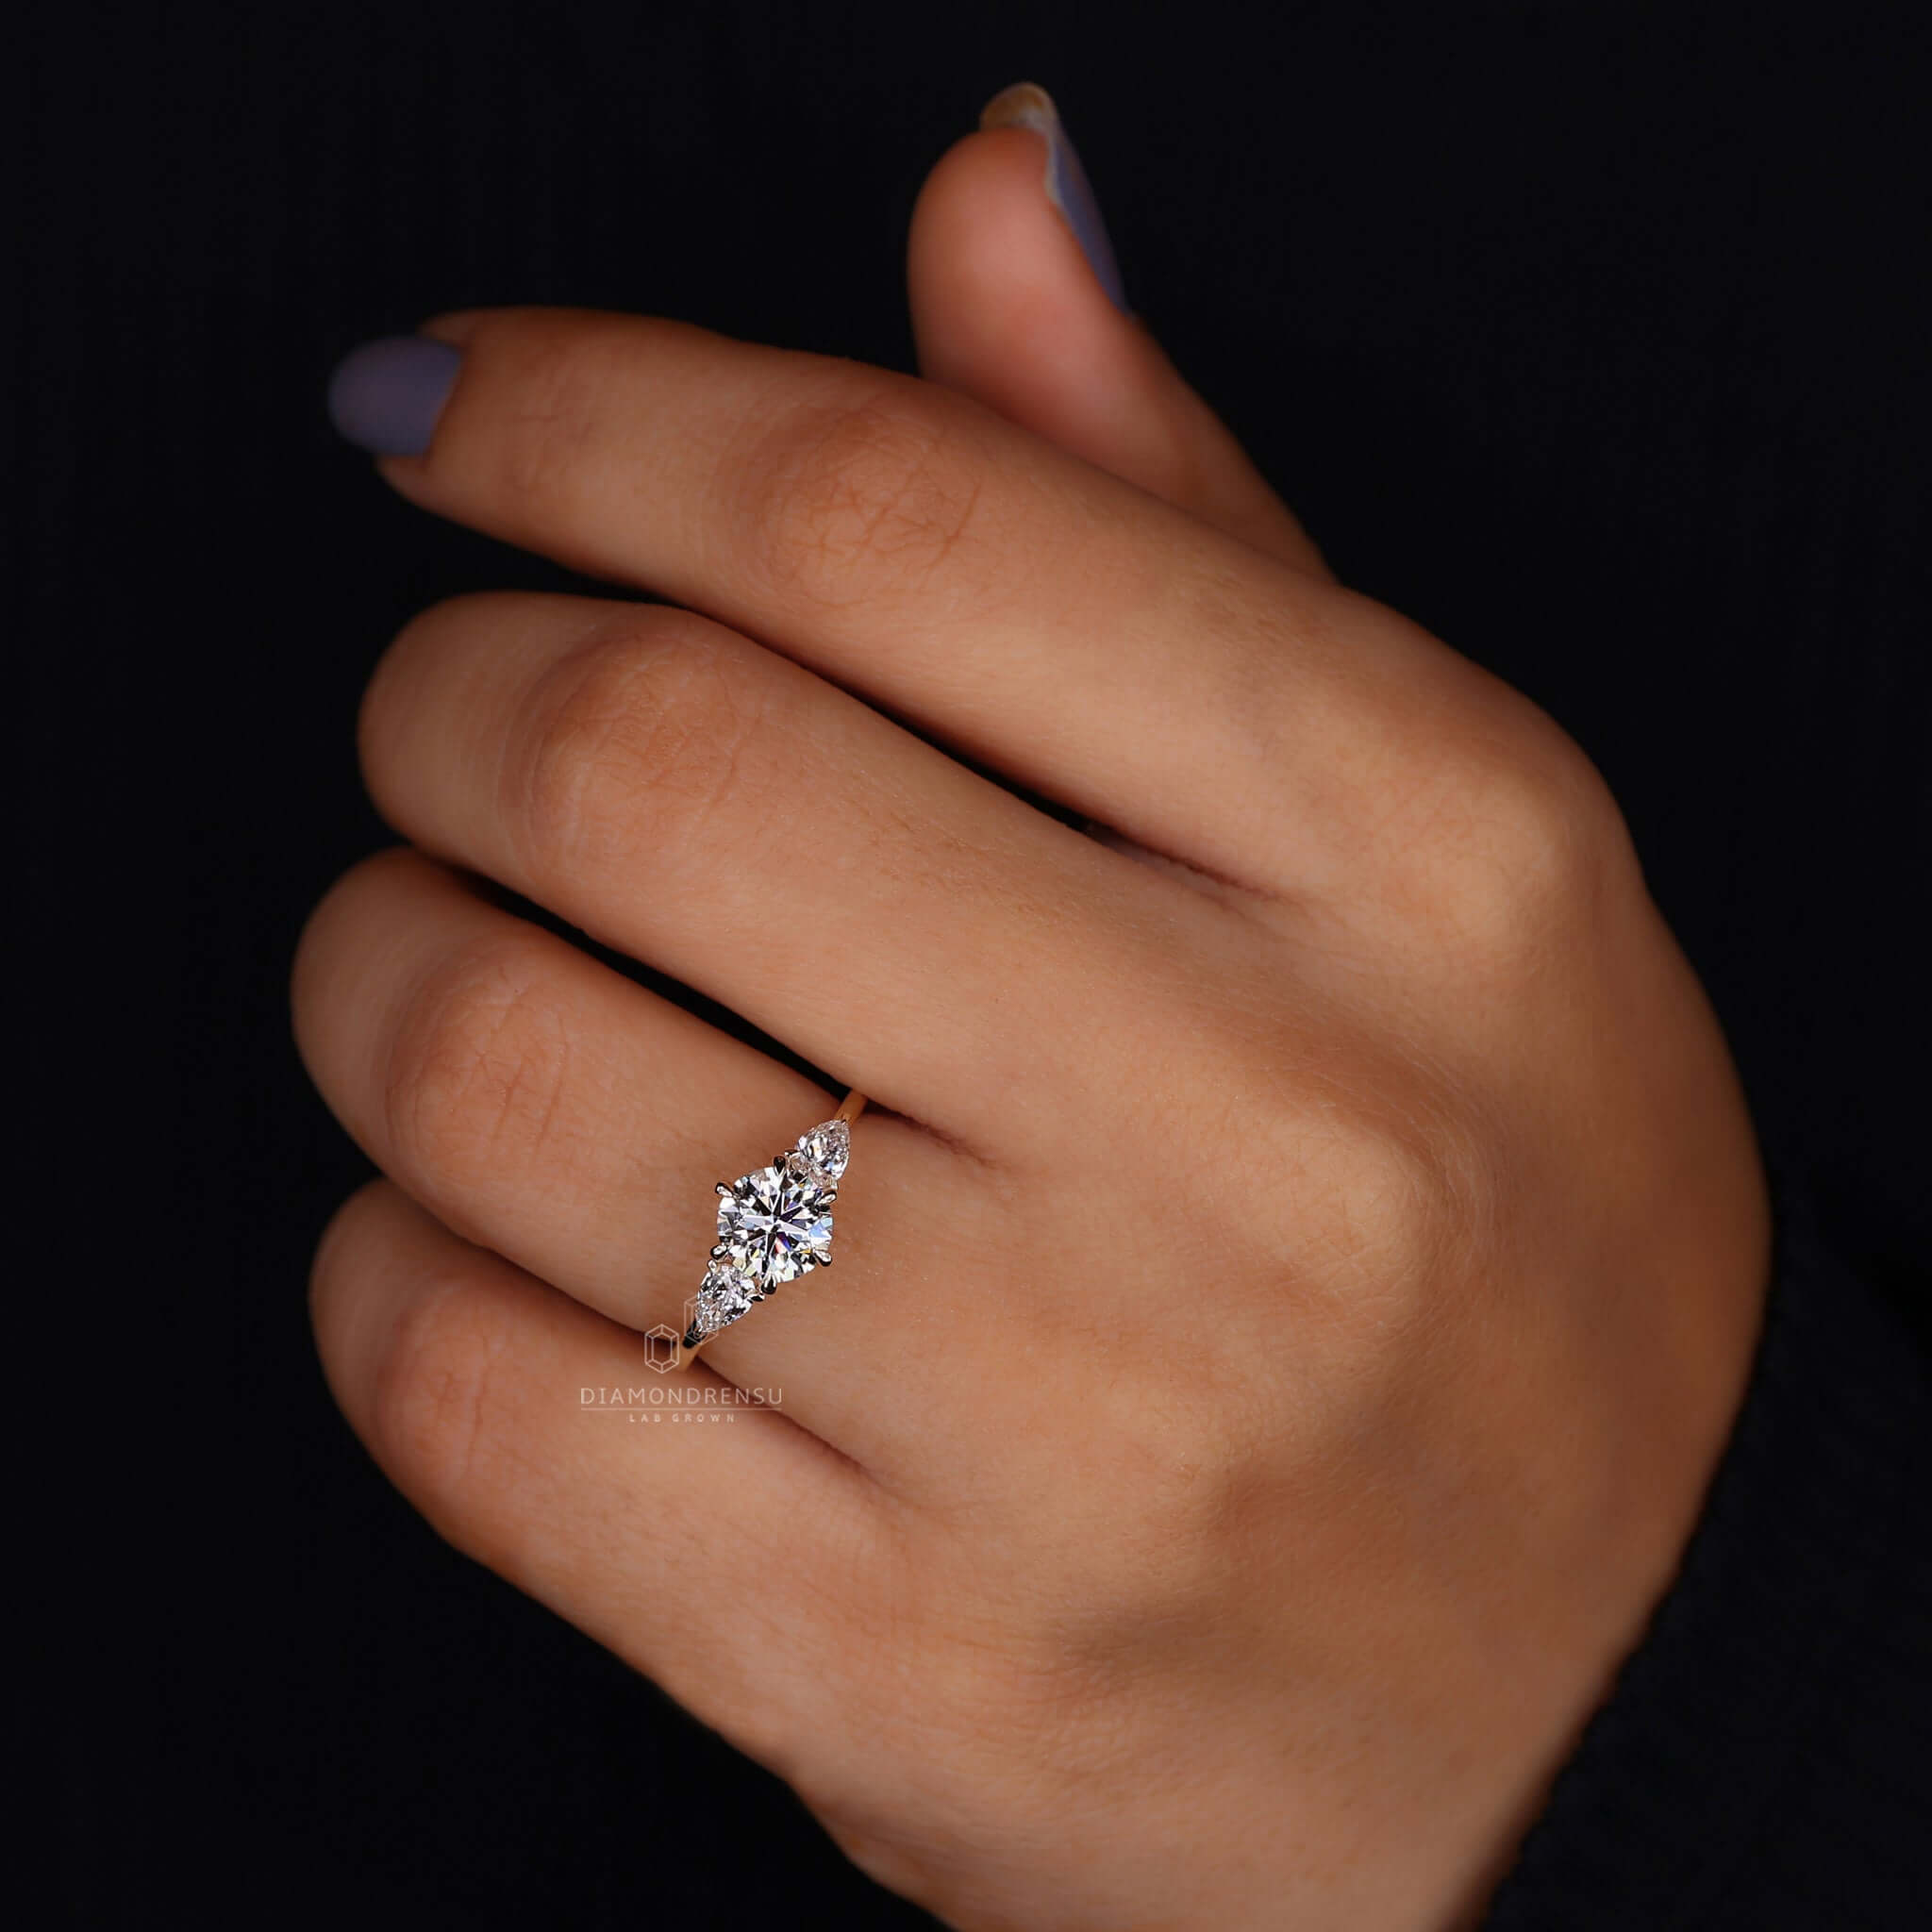 Hand displaying a three stone lab-grown diamond ring, highlighting its ethical beauty and sparkling design